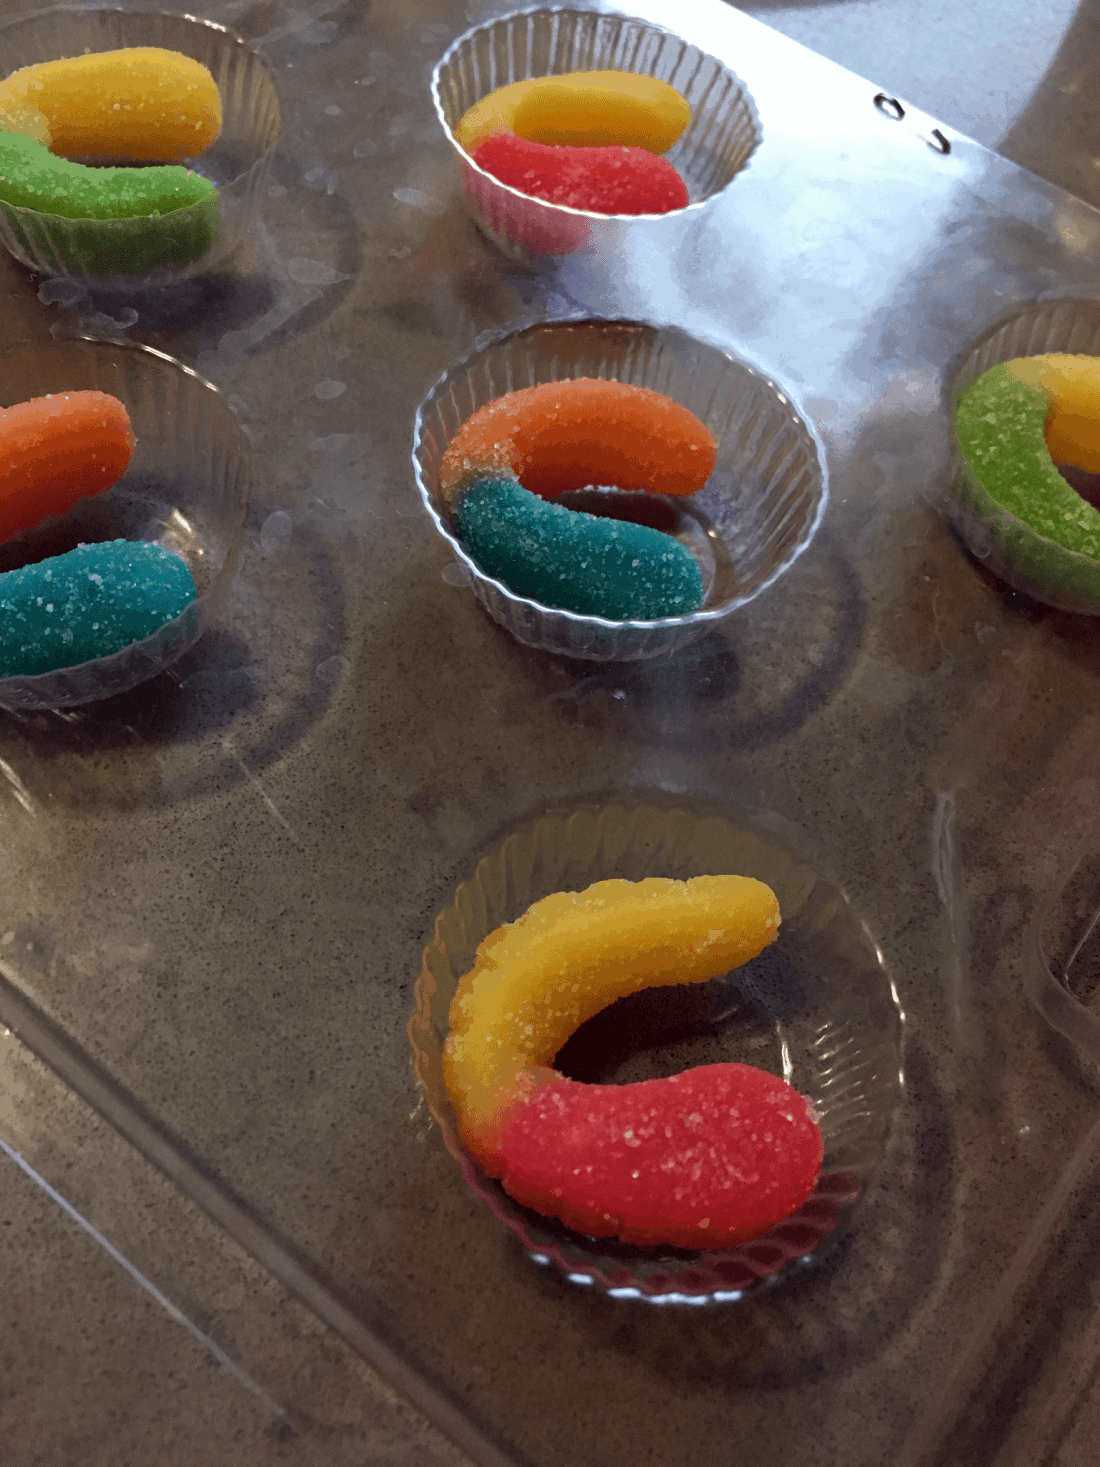 Make These Easy And Cute “worms In Dirt” Candy Treats!